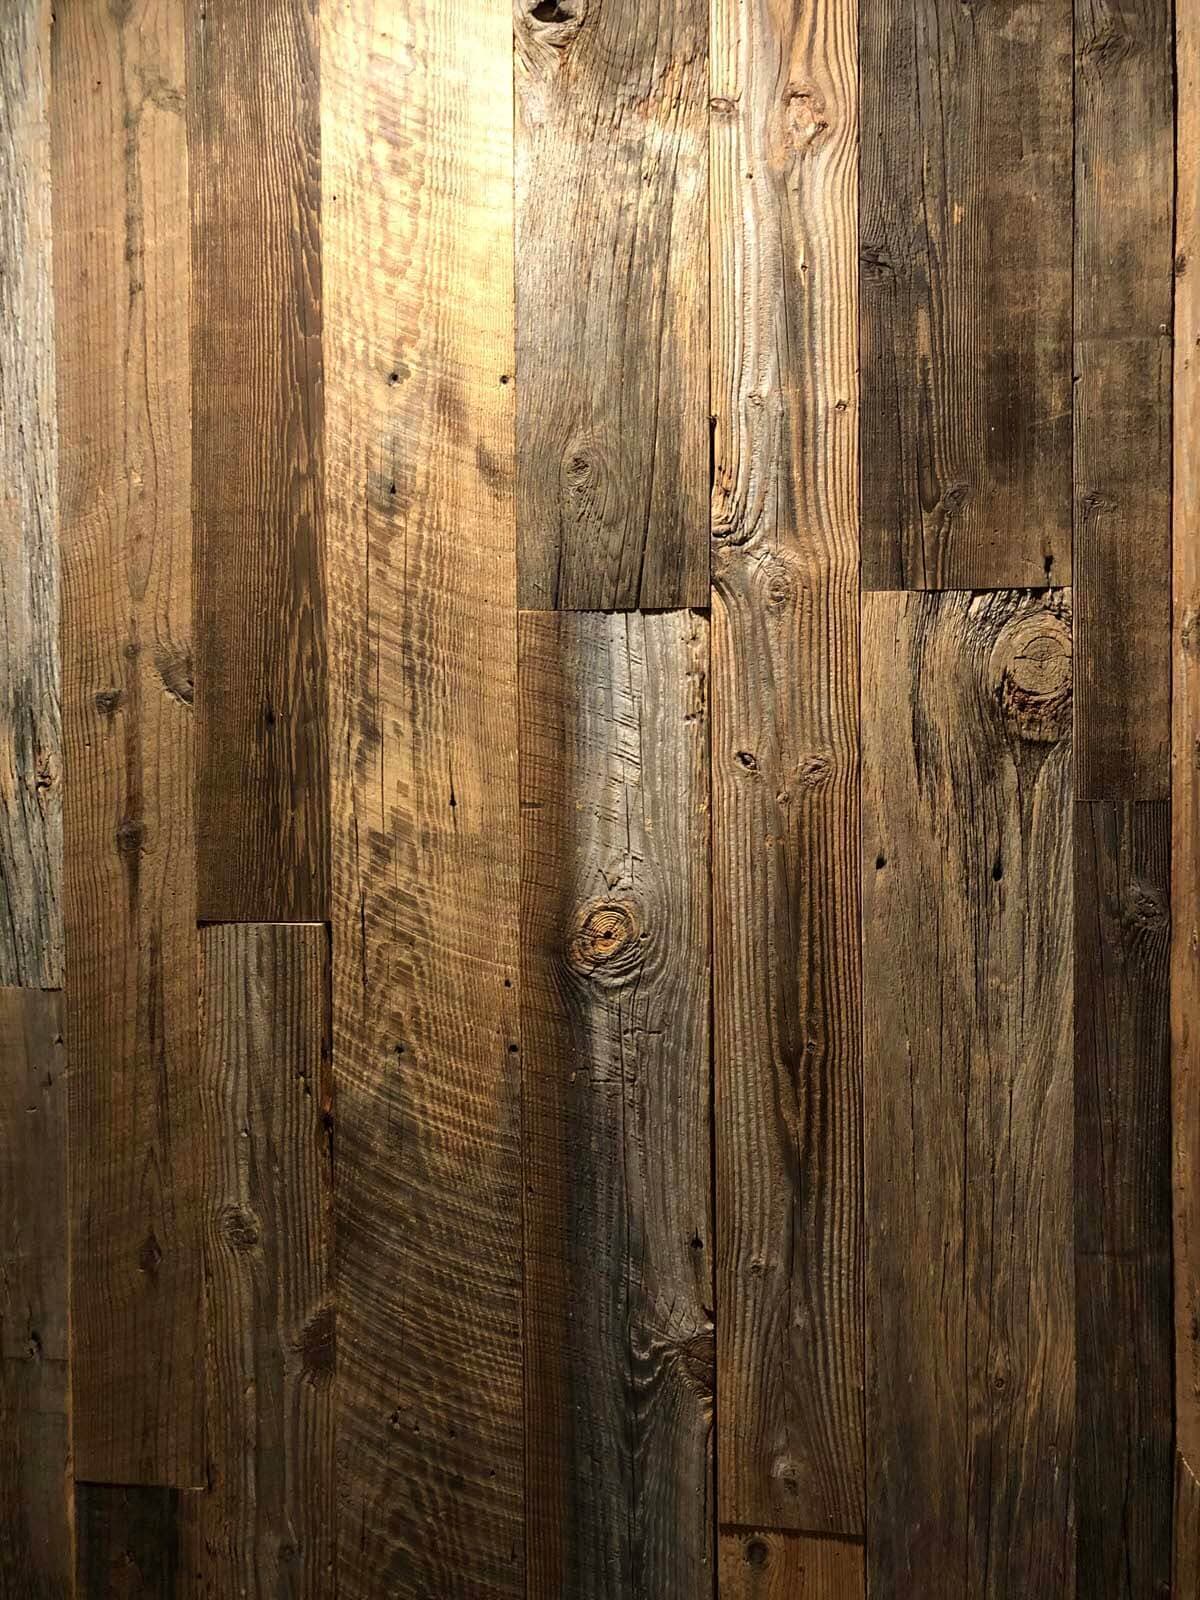 Original Surface Pine Wall Cladding planks in vertical alignment